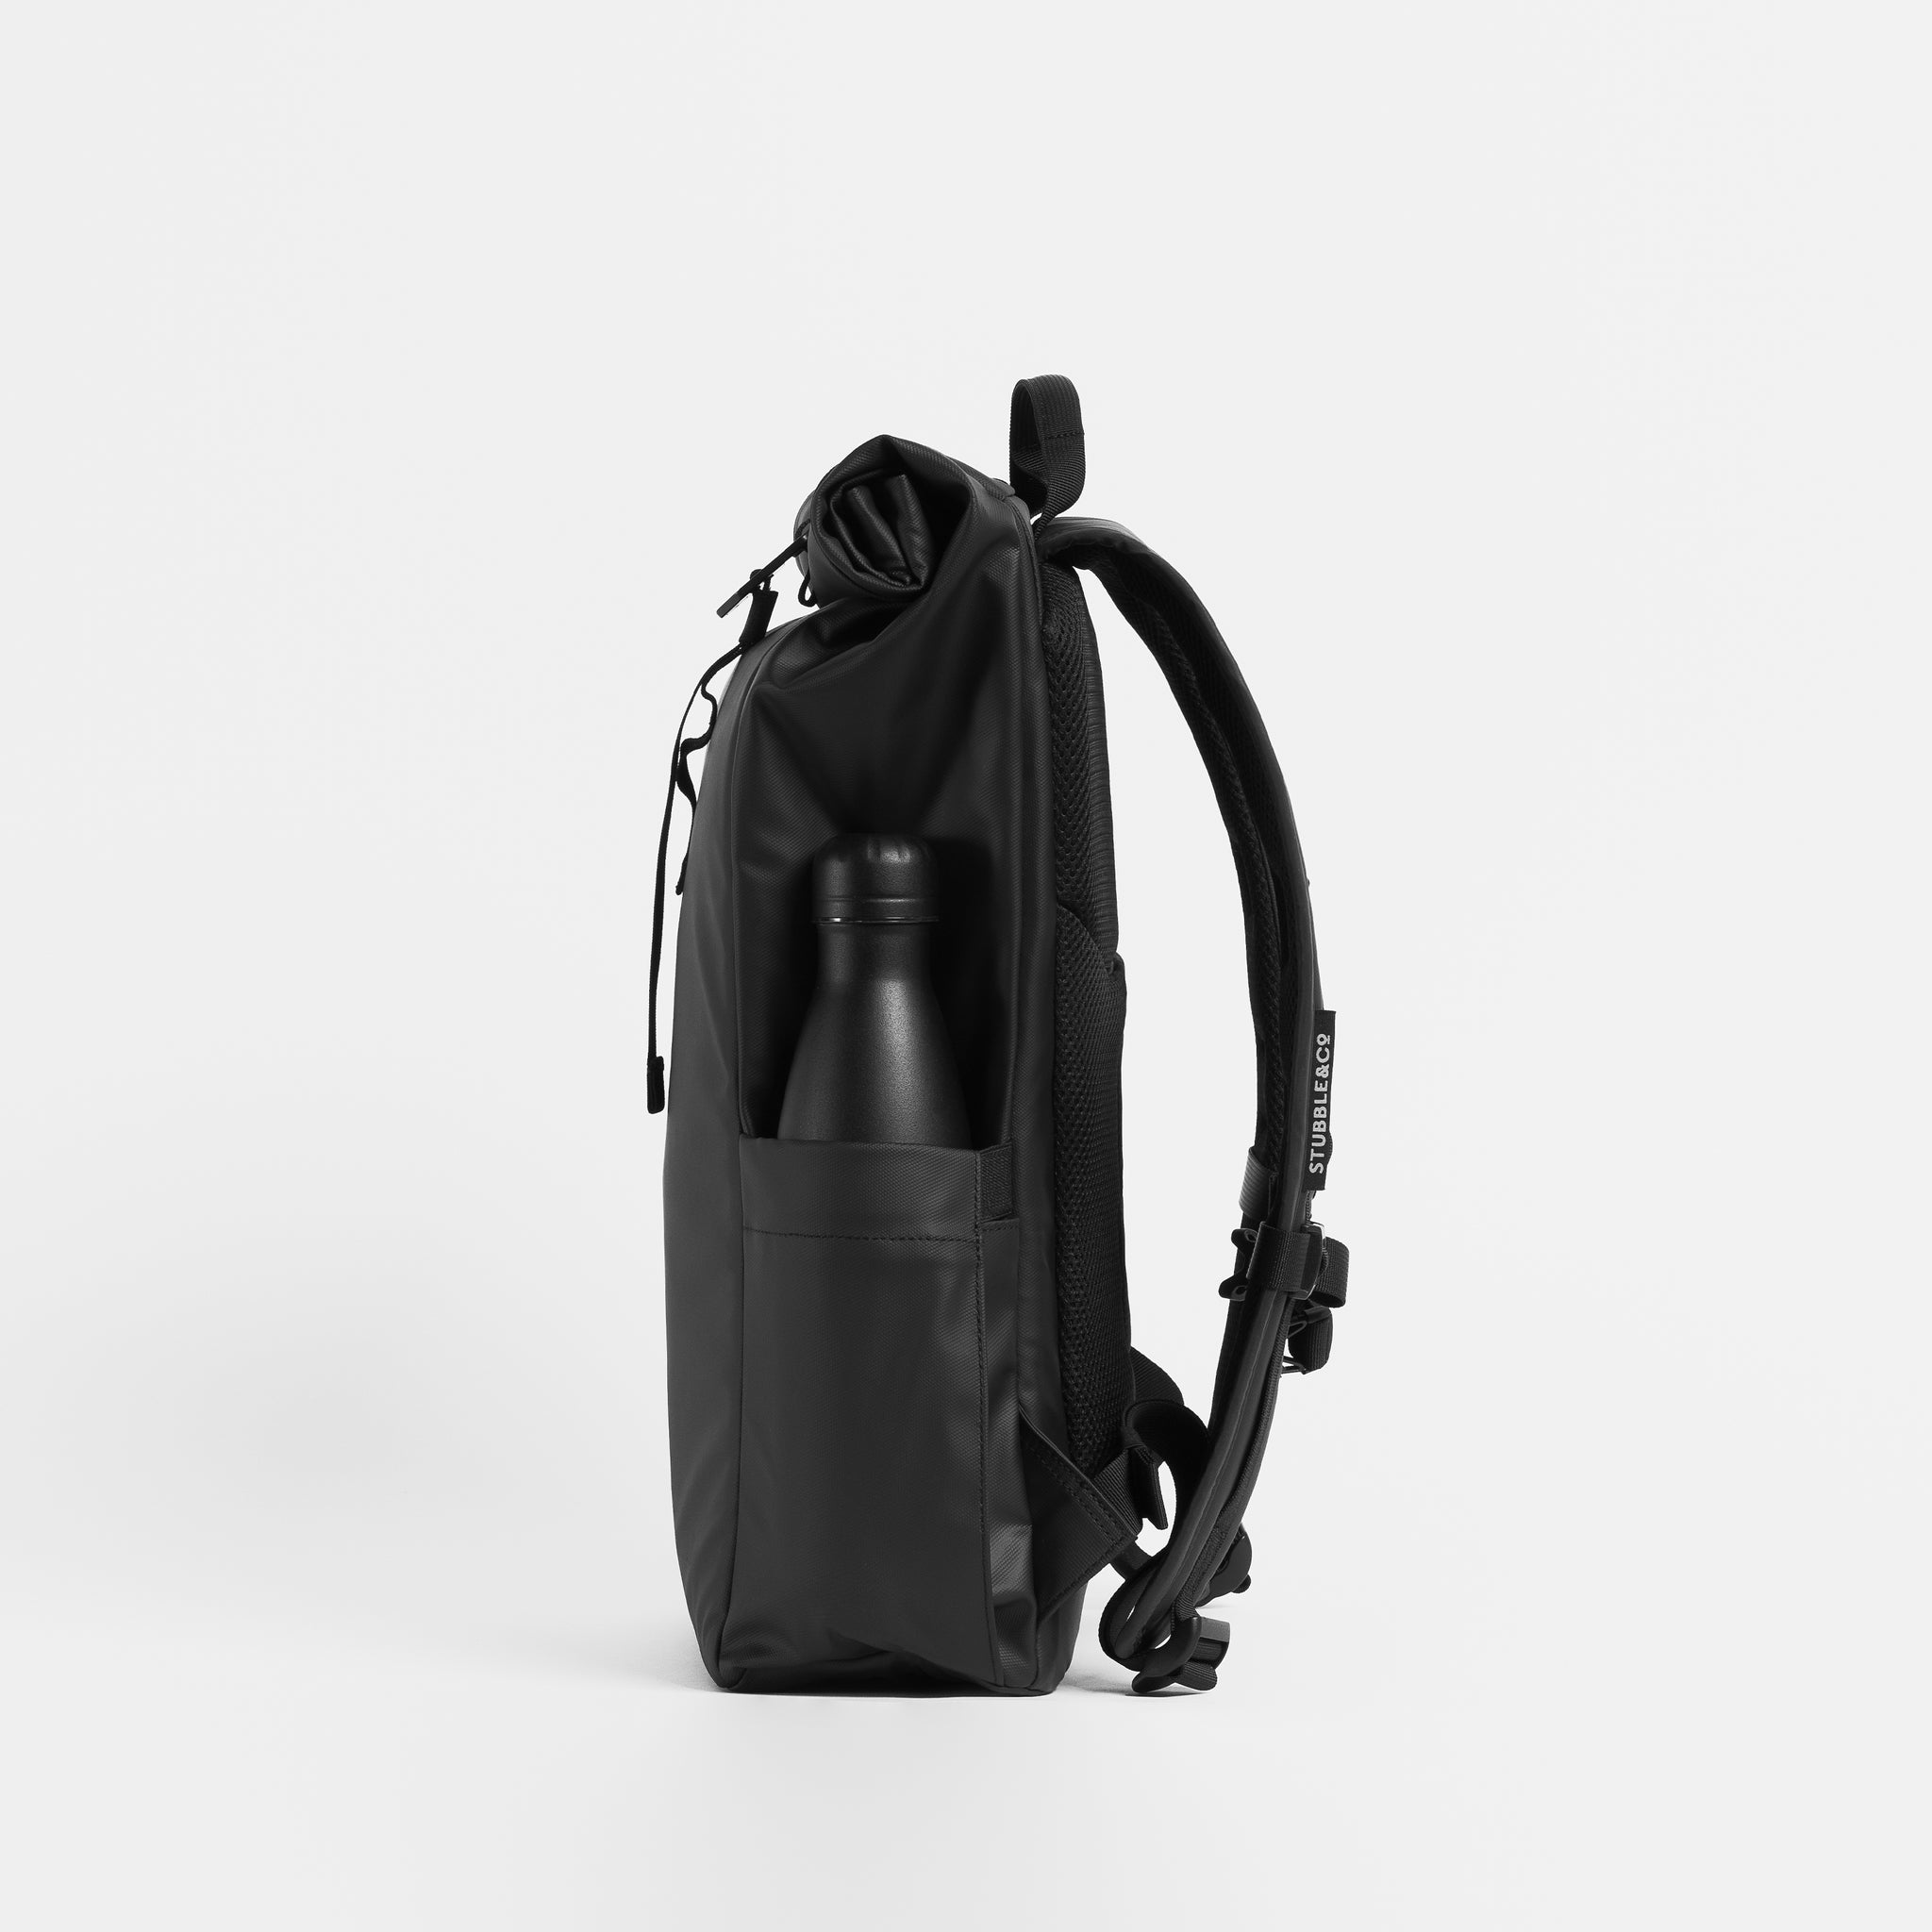 Side product shot of The Roll Top 15L in All Black with a water bottle in the side pocket.